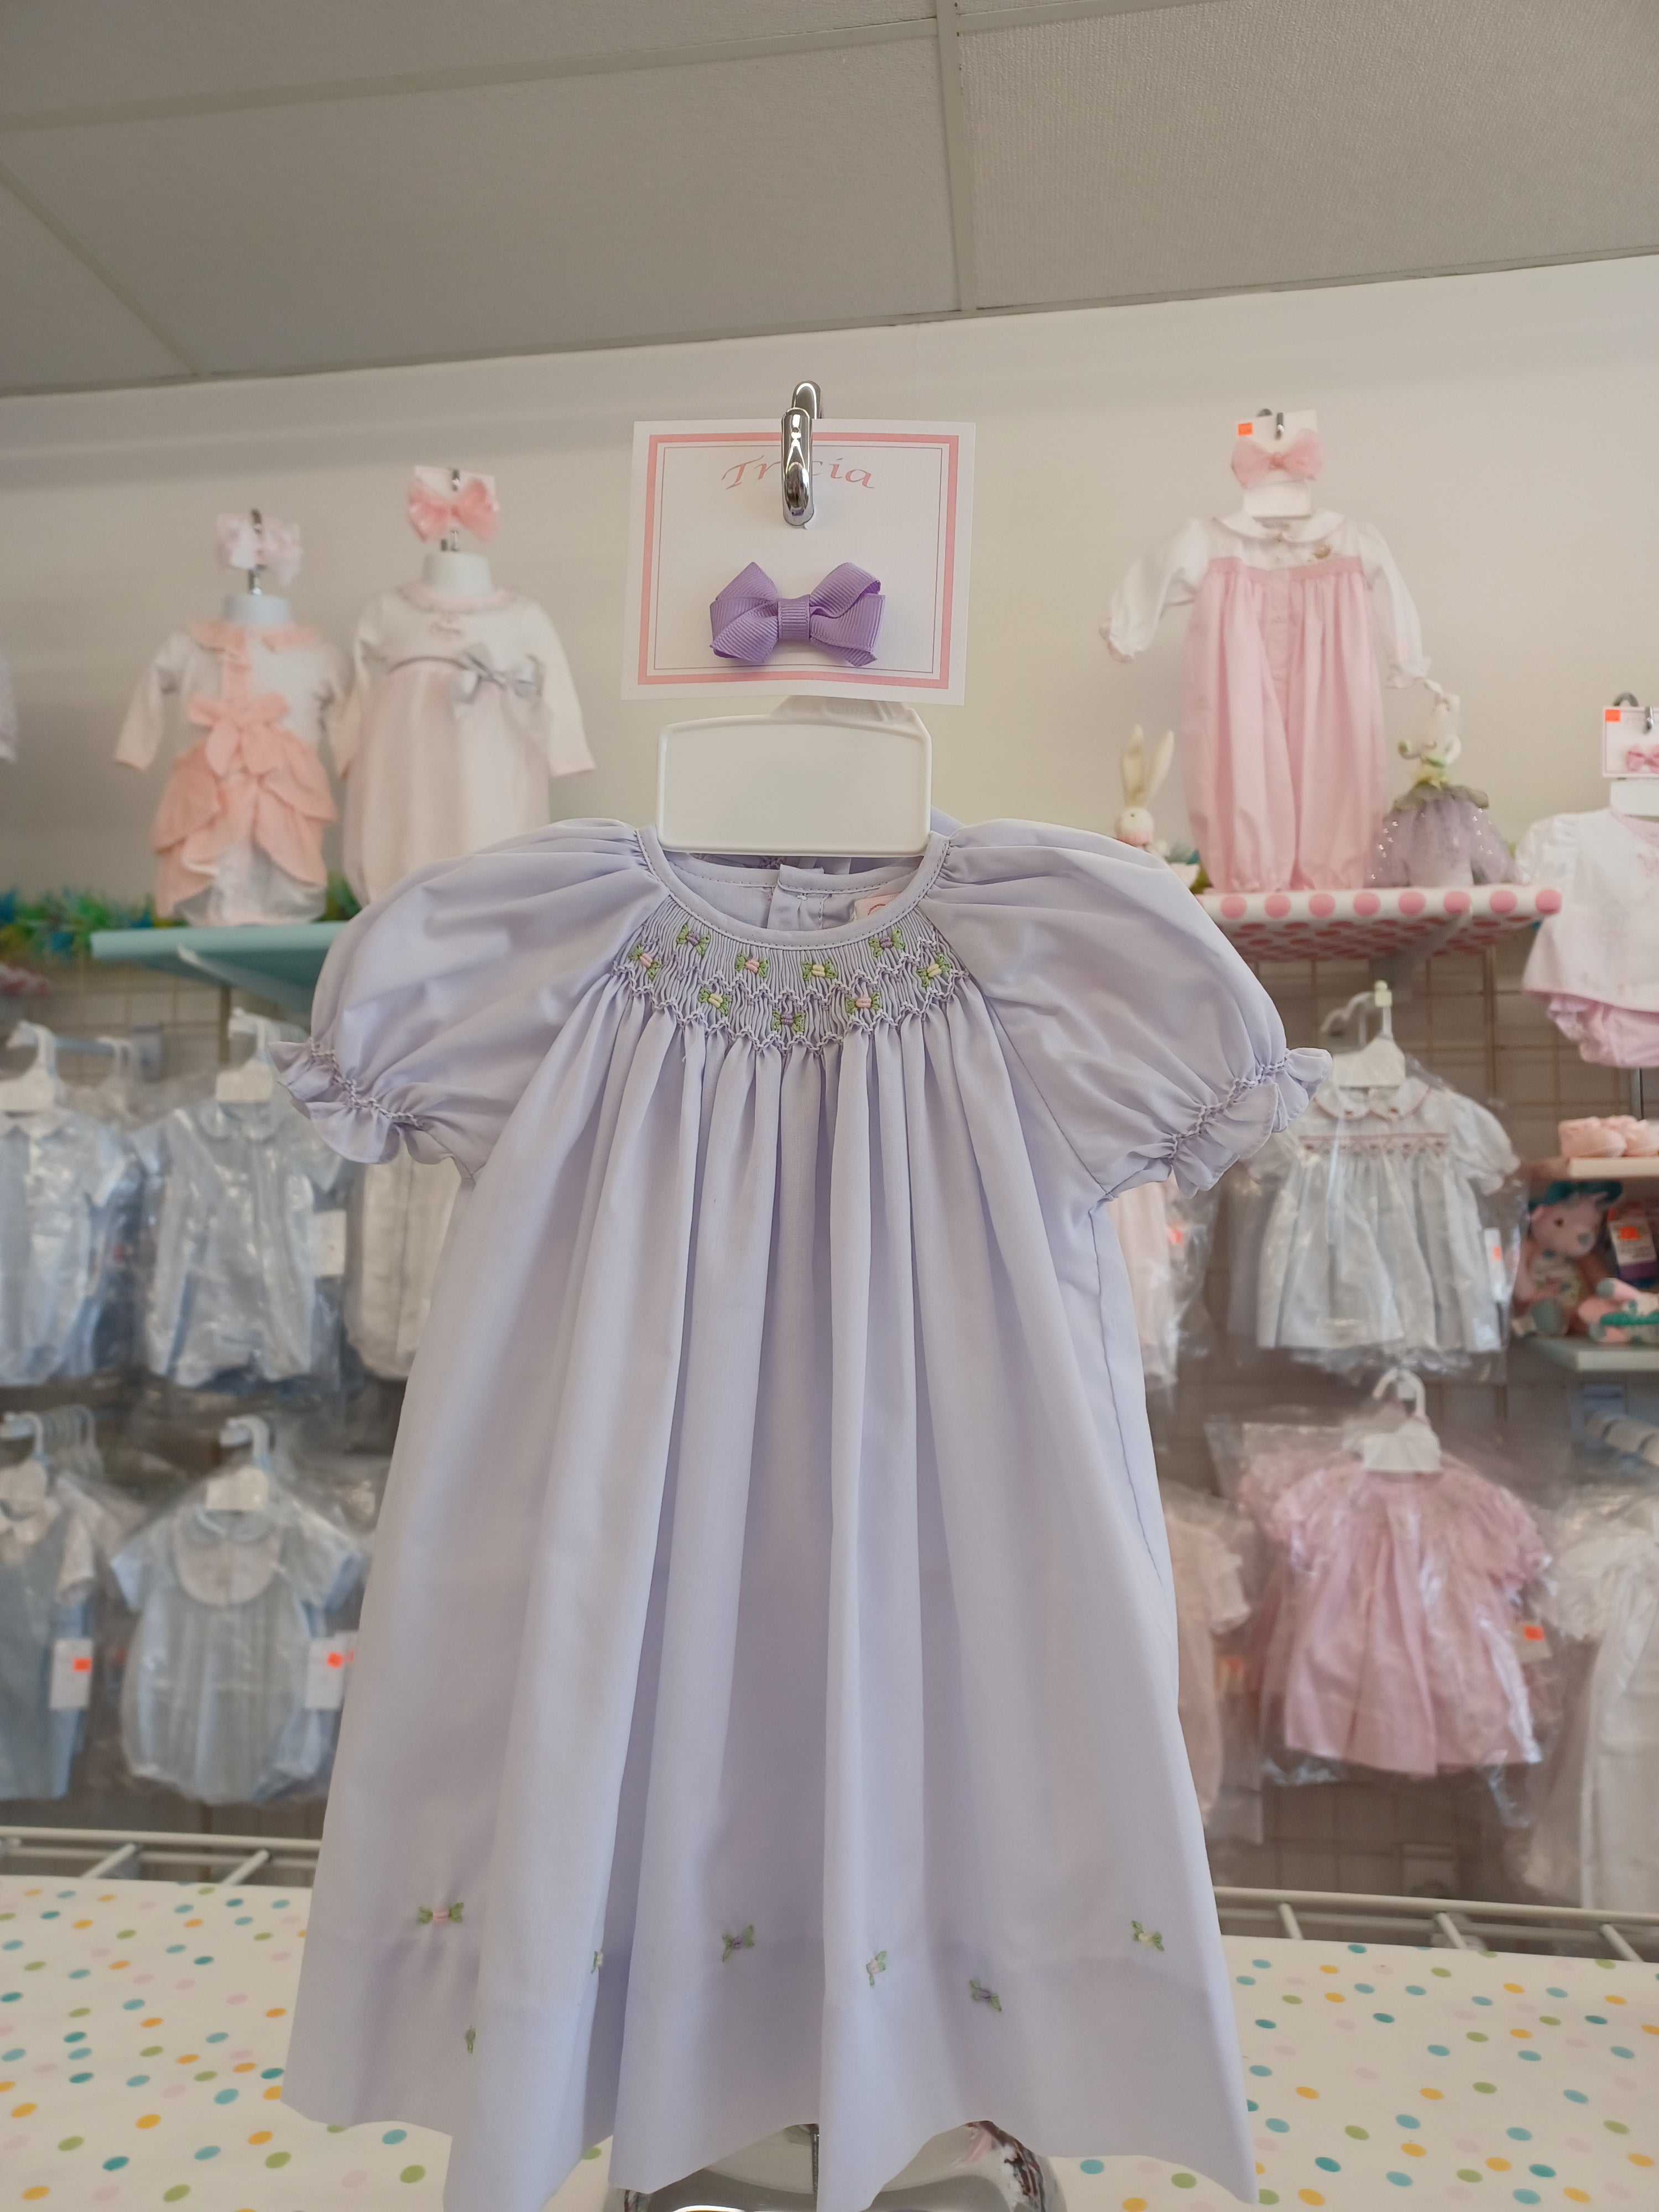 Preemie Lavender Smocked and Embroidered Dress With Bonnet